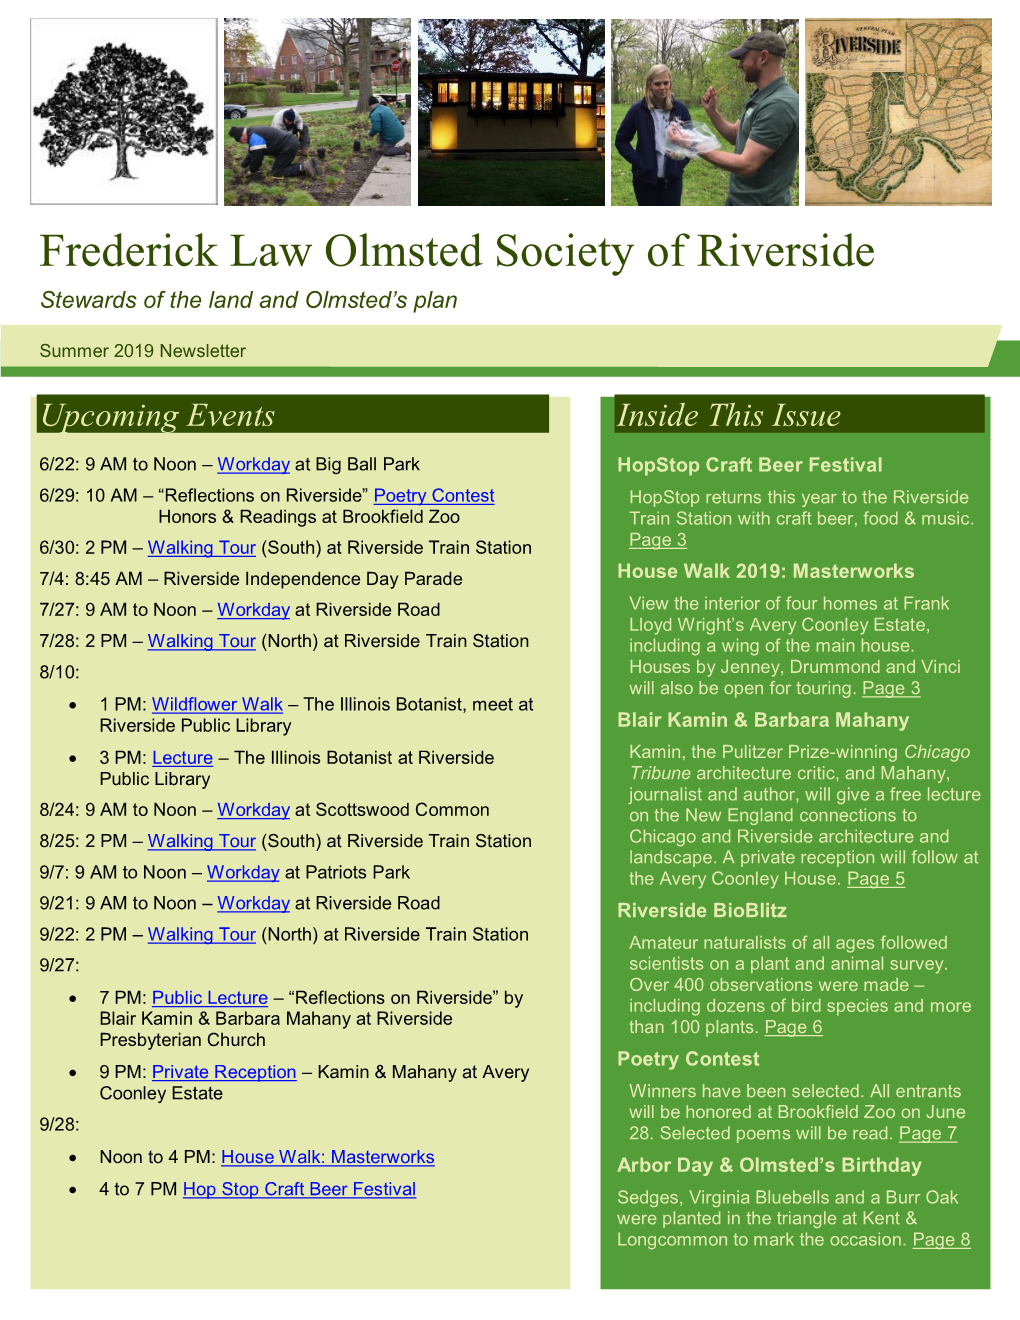 Frederick Law Olmsted Society of Riverside Stewards of the Land and Olmsted’S Plan